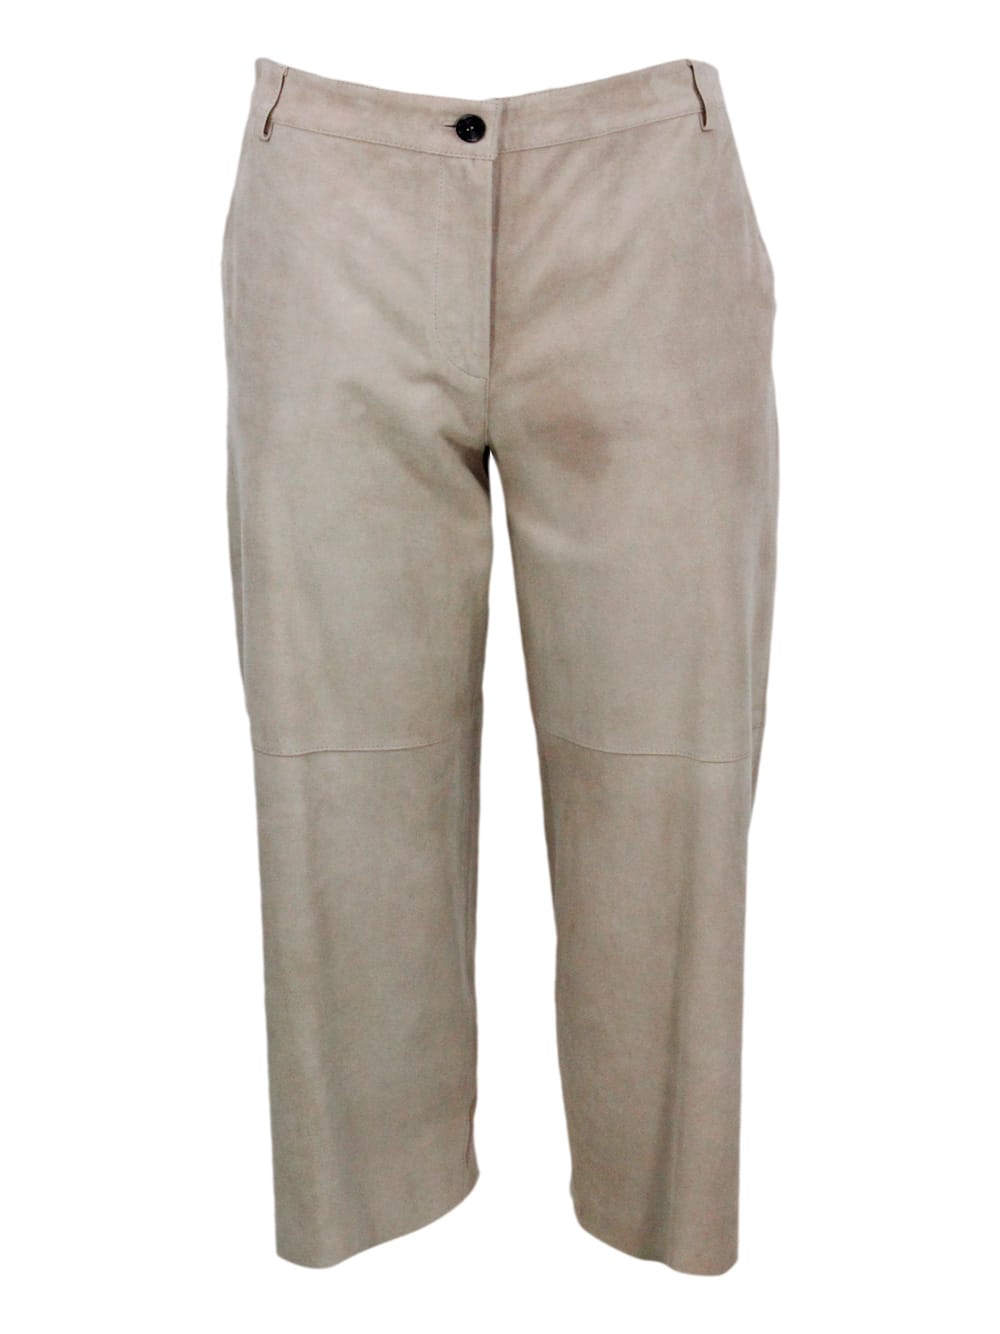 Shop Antonelli Trousers Made Of Soft Suede, With A Soft Fit And Zip And Button Closure With Elastic Waist On The Ba In Beige